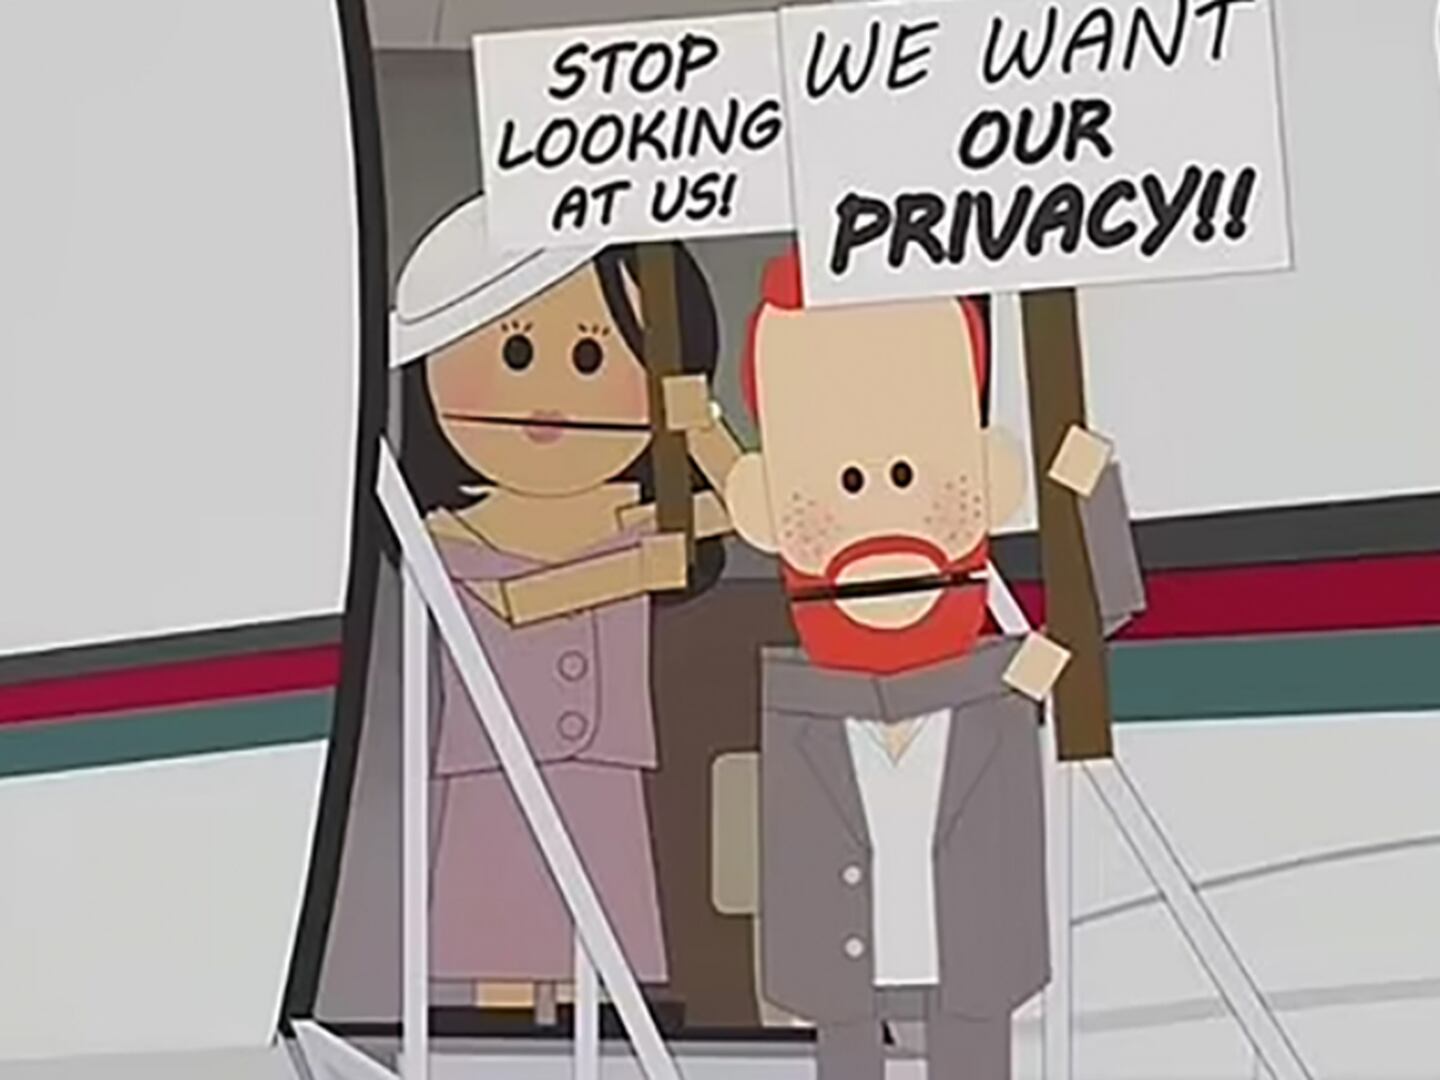 Watch the all-new Worldwide Privacy Tour full episode for free now:  cart.mn/privacytour